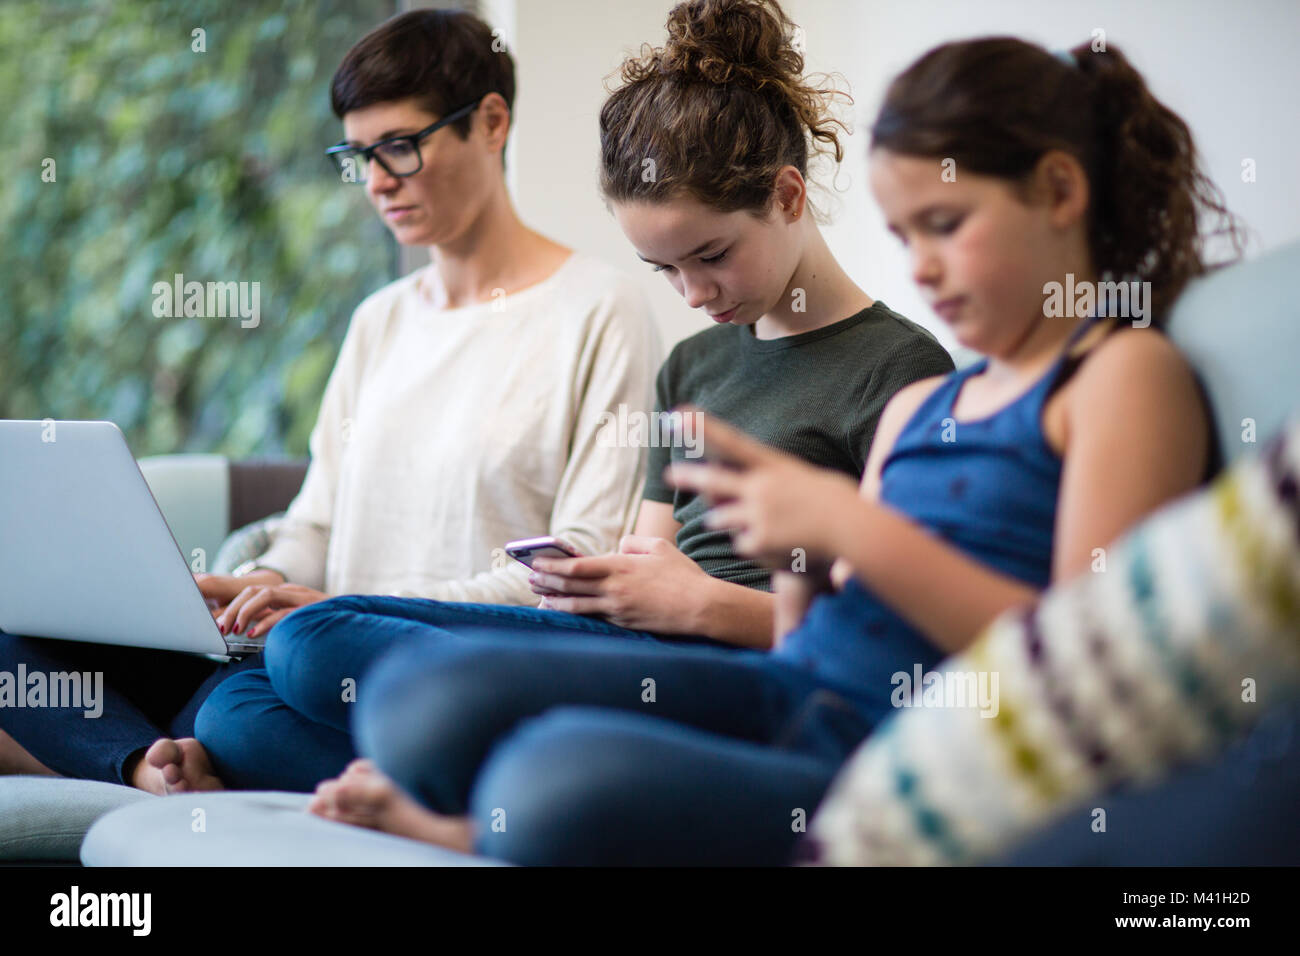 Family all using personal technology Stock Photo